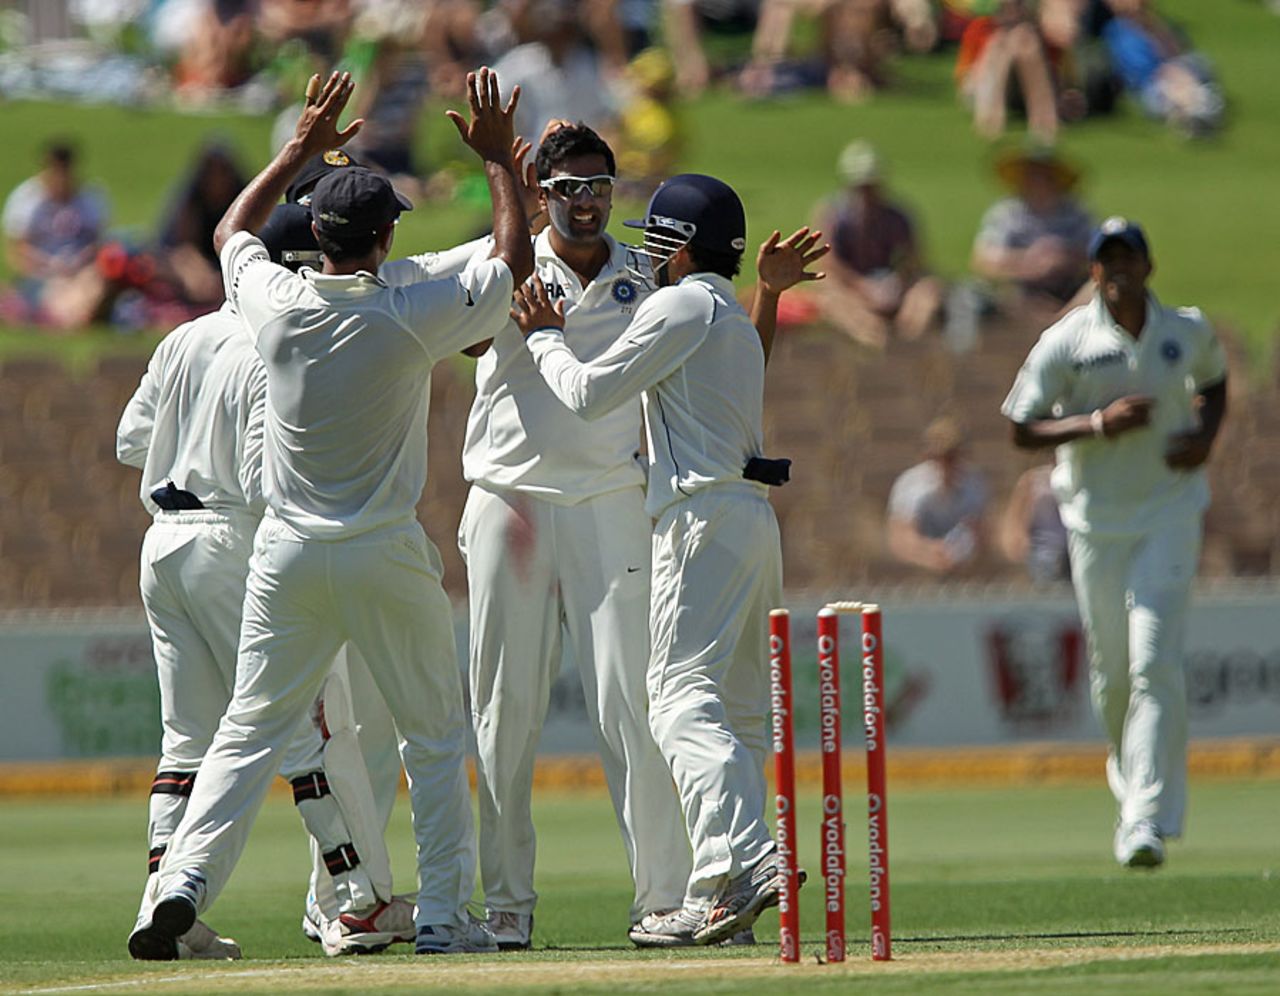 India get together after Shaun Marsh's dismissal, Australia v India, 4th Test, Adelaide, 1st day, January 24, 2012